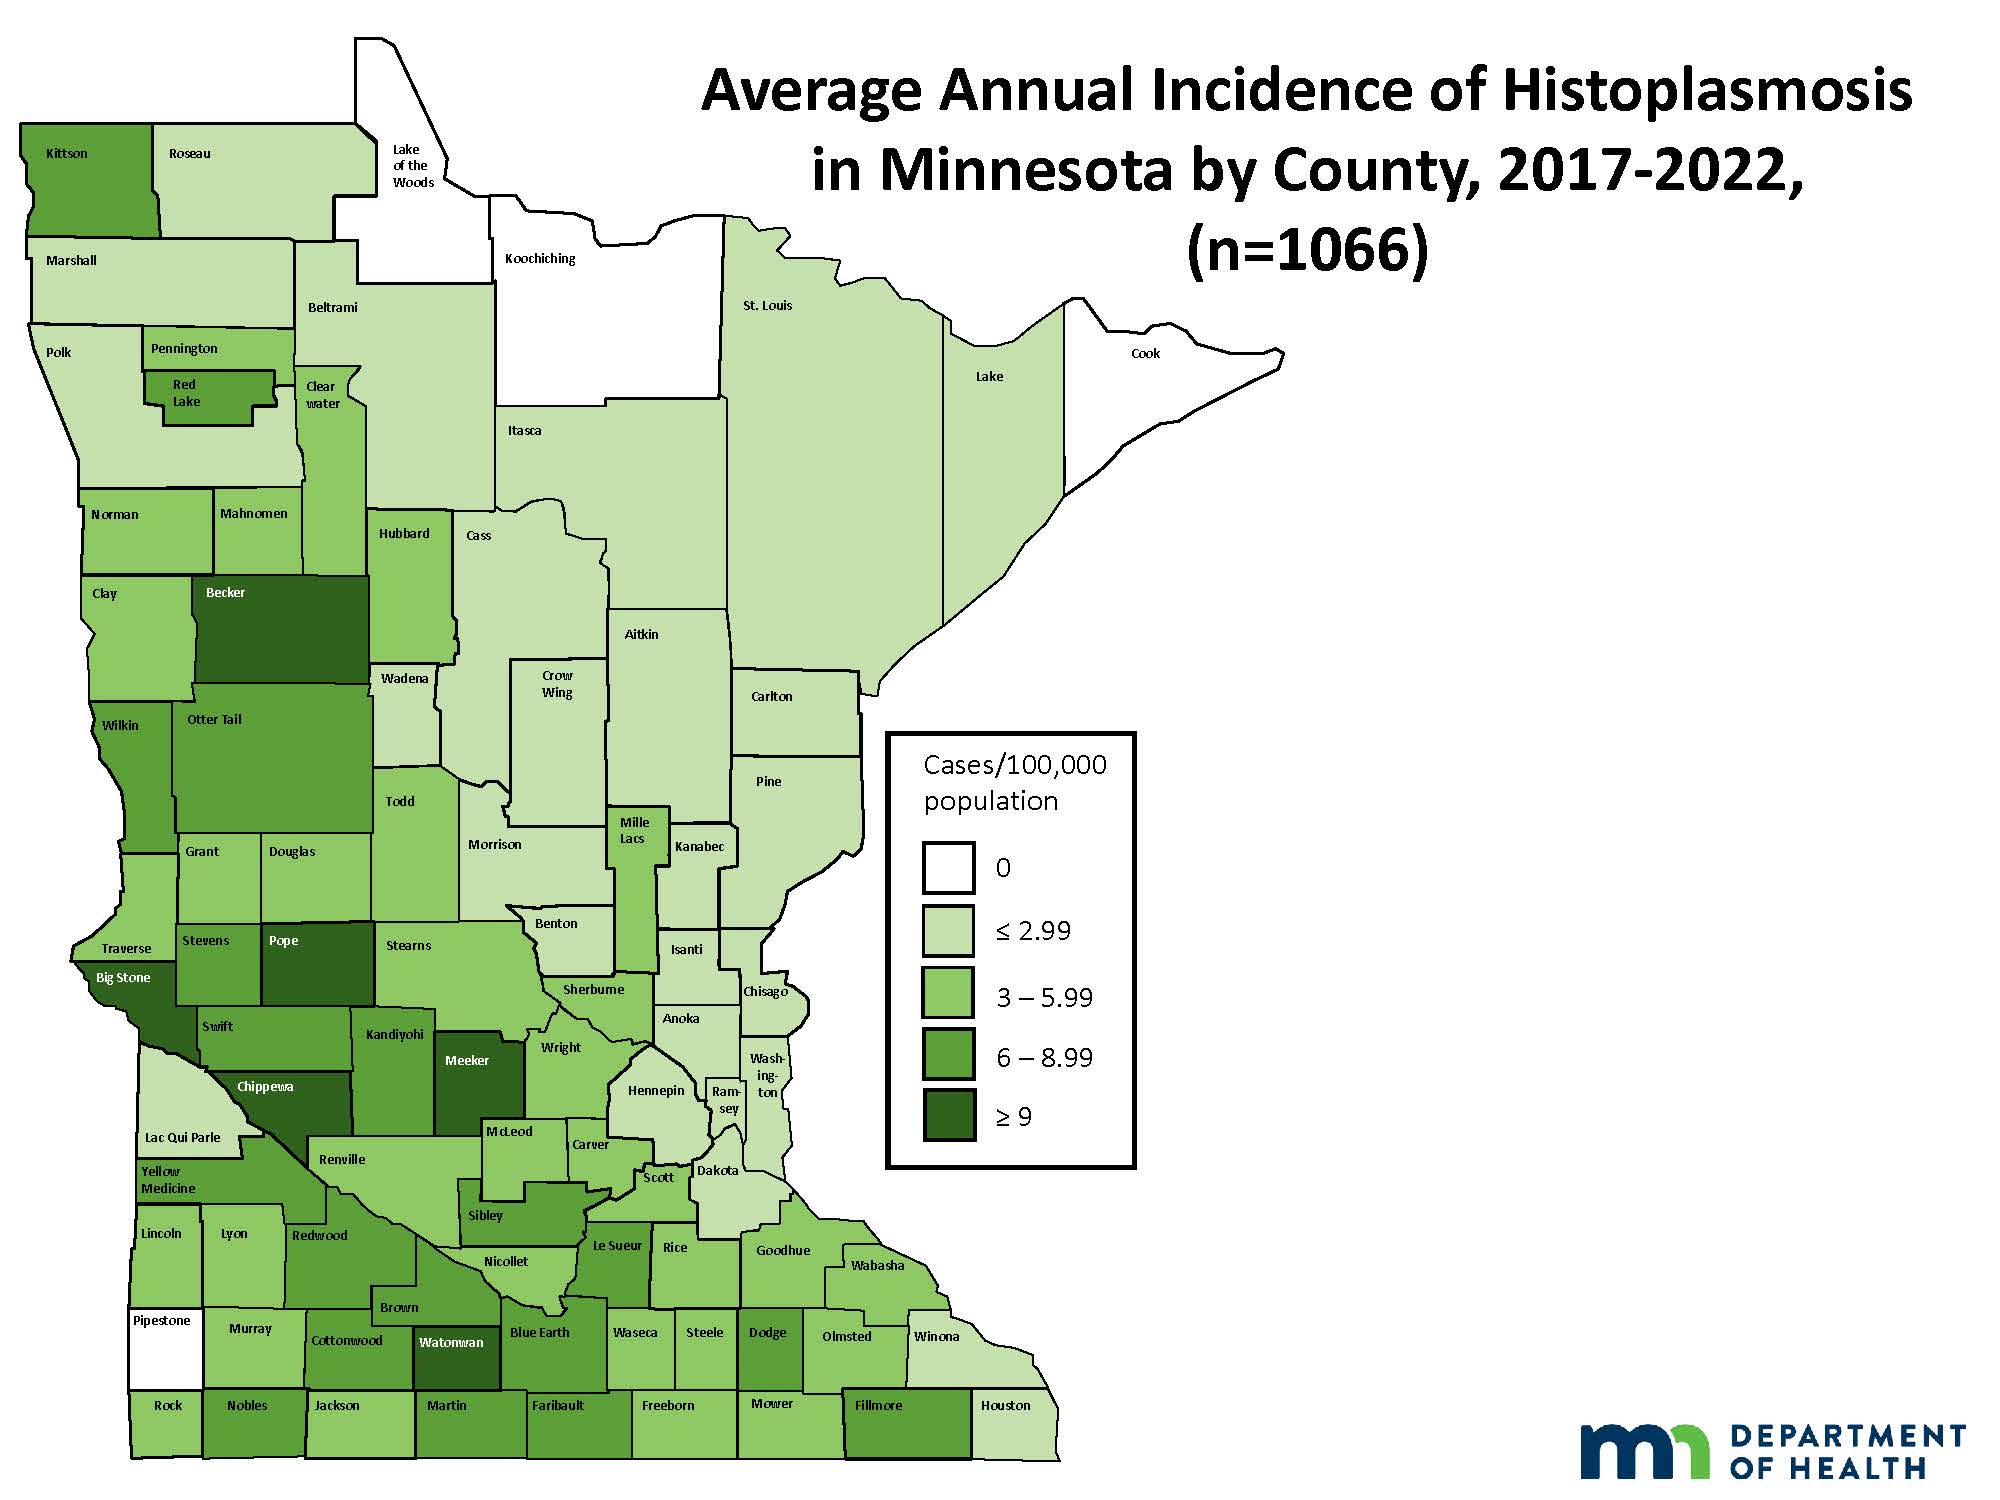 Thumbnail of map of Minnesota showing average annual incidence of Histoplasmosis, 2017-2018